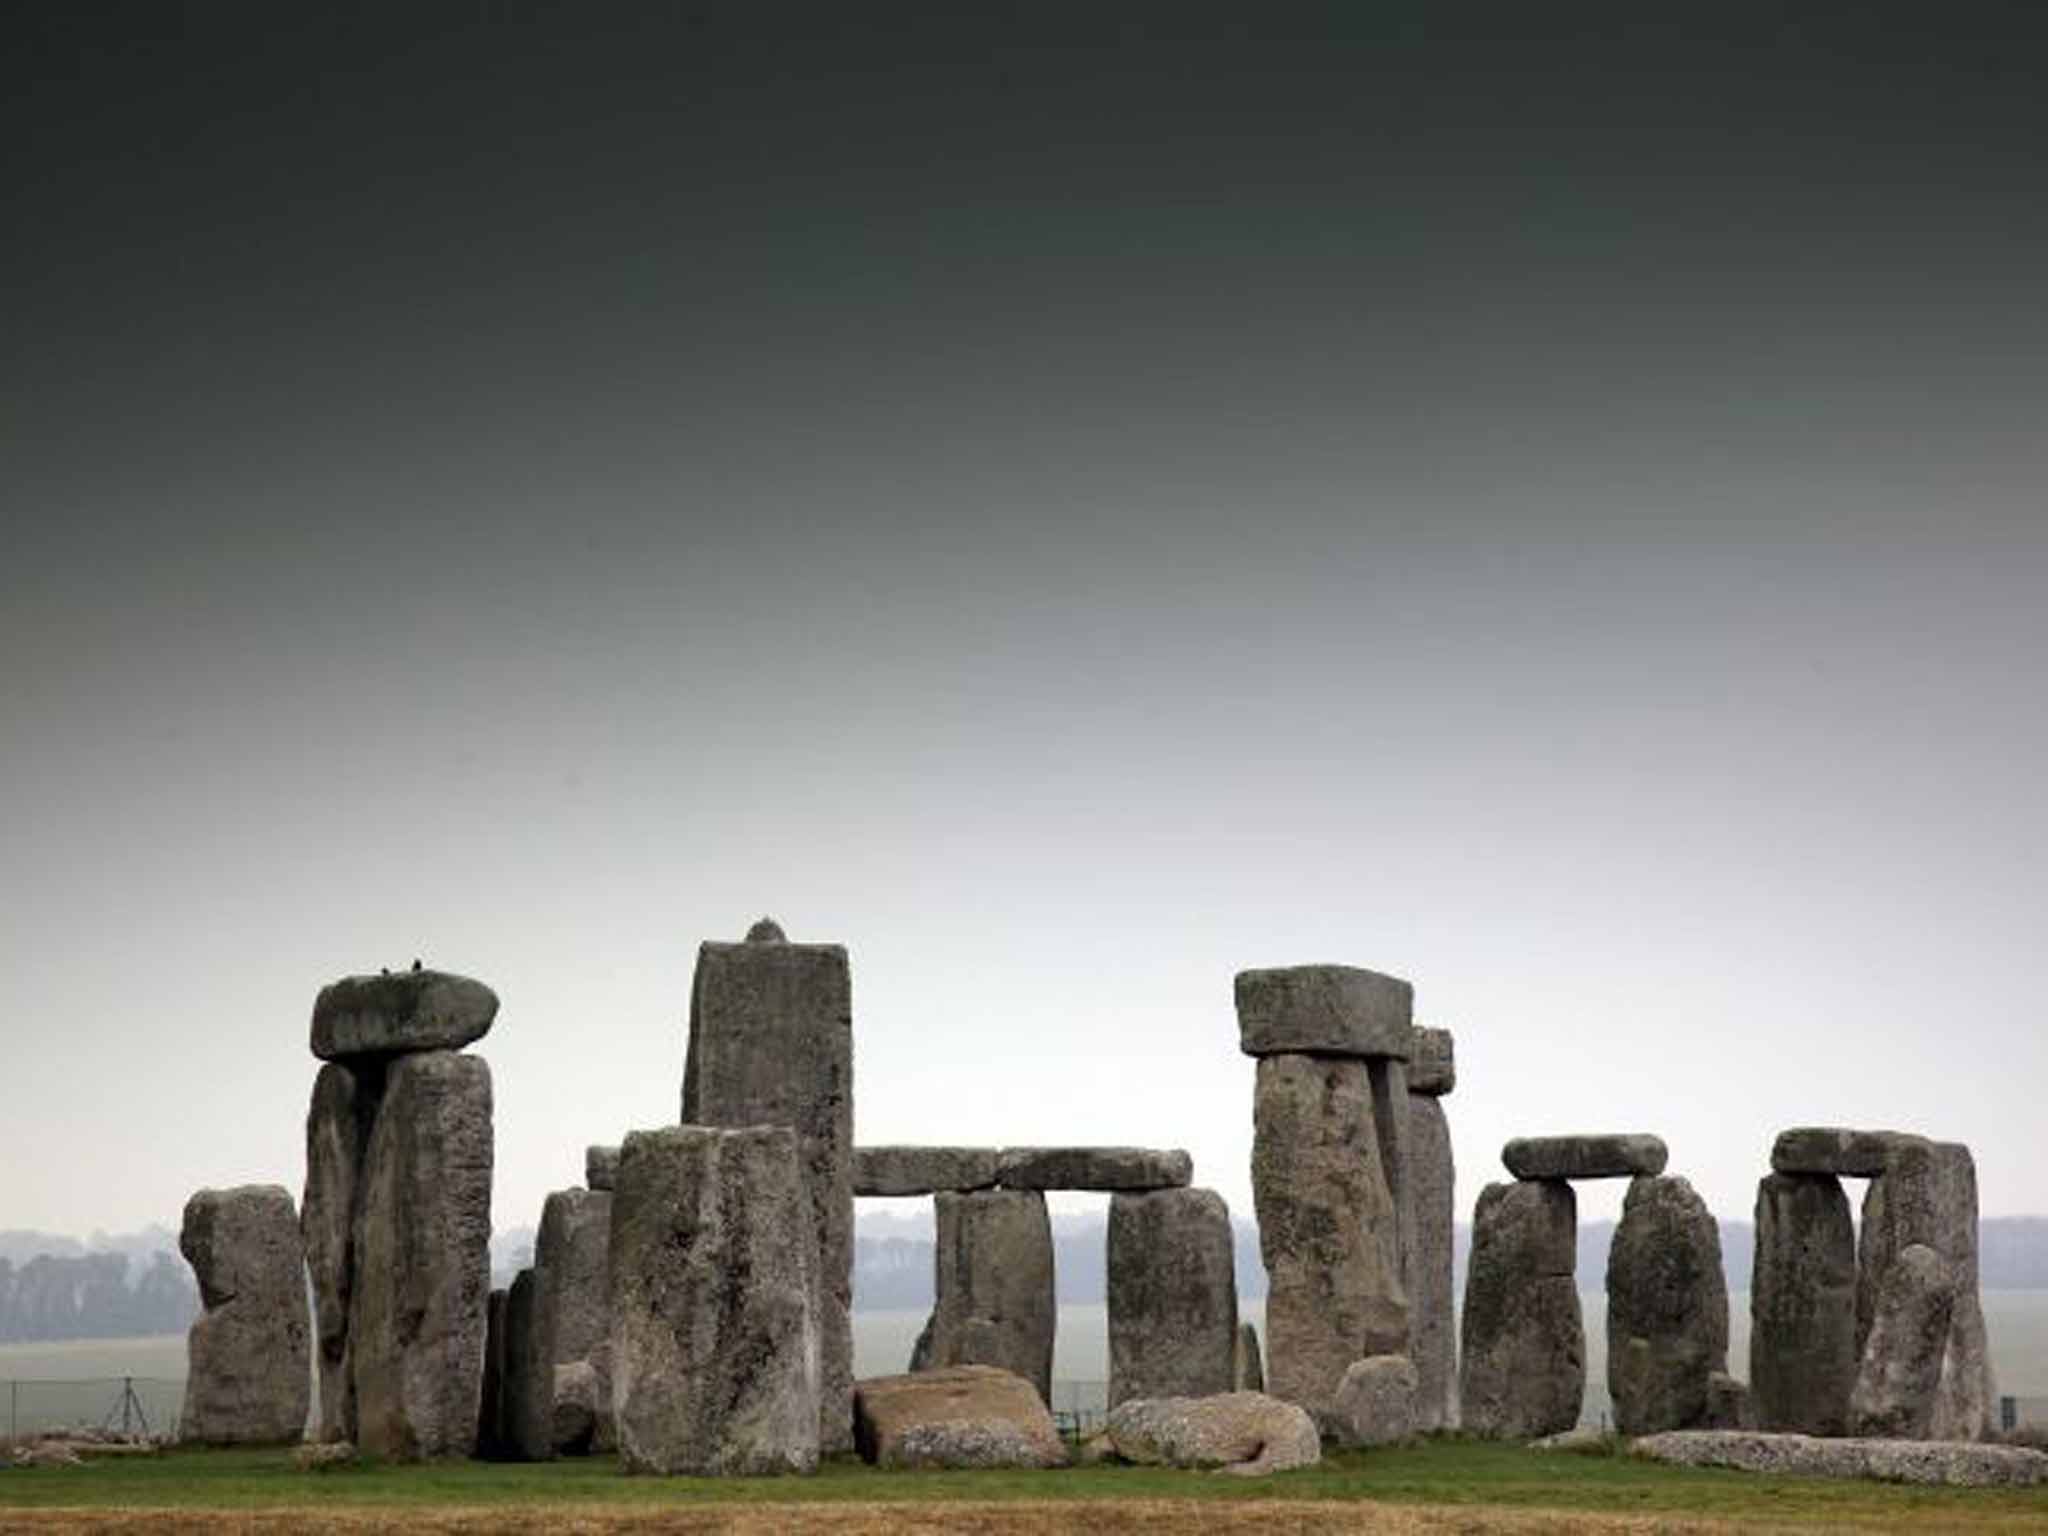 Stonehenge: Access-all-areas visits to the neolithic site are possible every morning and evening (except Tuesday and Wednesday mornings) for up to 26 people